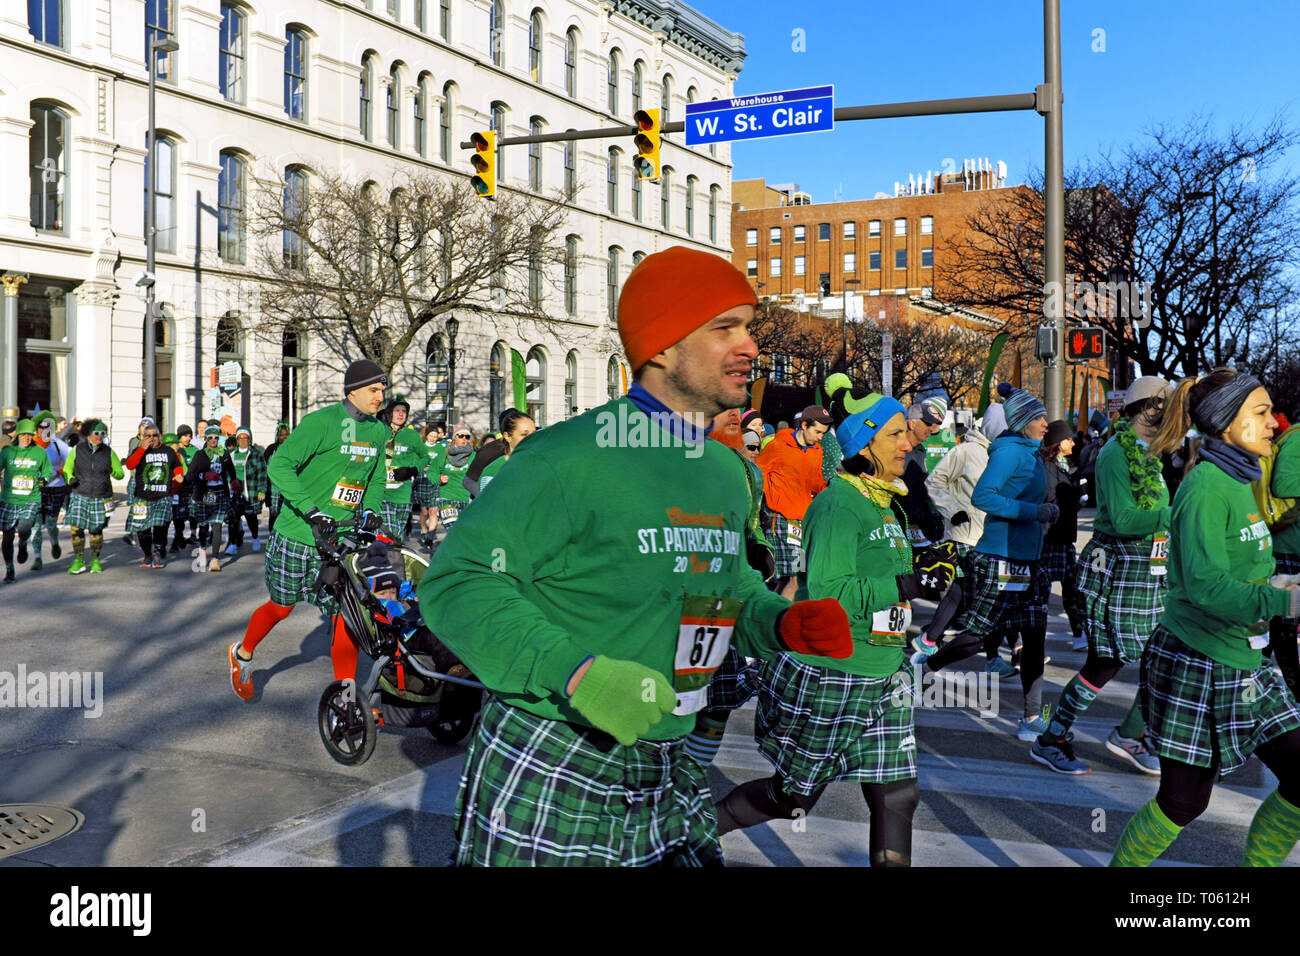 Cleveland, Ohio, USA, 17th March, 2019.  Runners in the 2019 Cleveland St. Patrick's Day Kilt Run attempt to break a world record for the largest kilt run.  Thousands of participants make their way through the Warehouse District stretch of the race.  Credit: Mark Kanning/Alamy Live News. Stock Photo